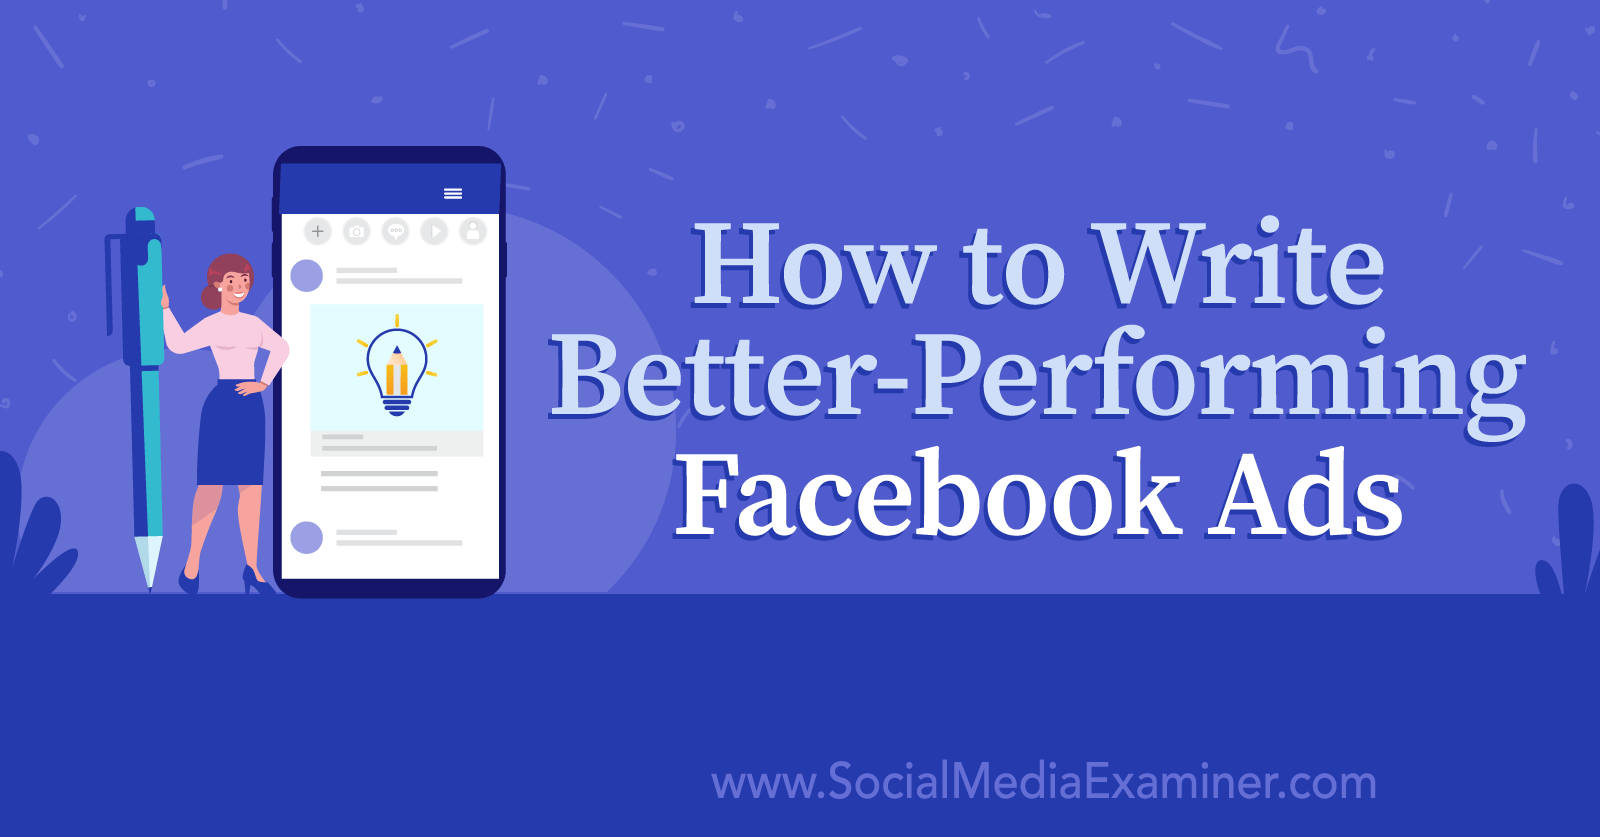 How to Write Better-Performing Facebook Ads on Social Media Examiner